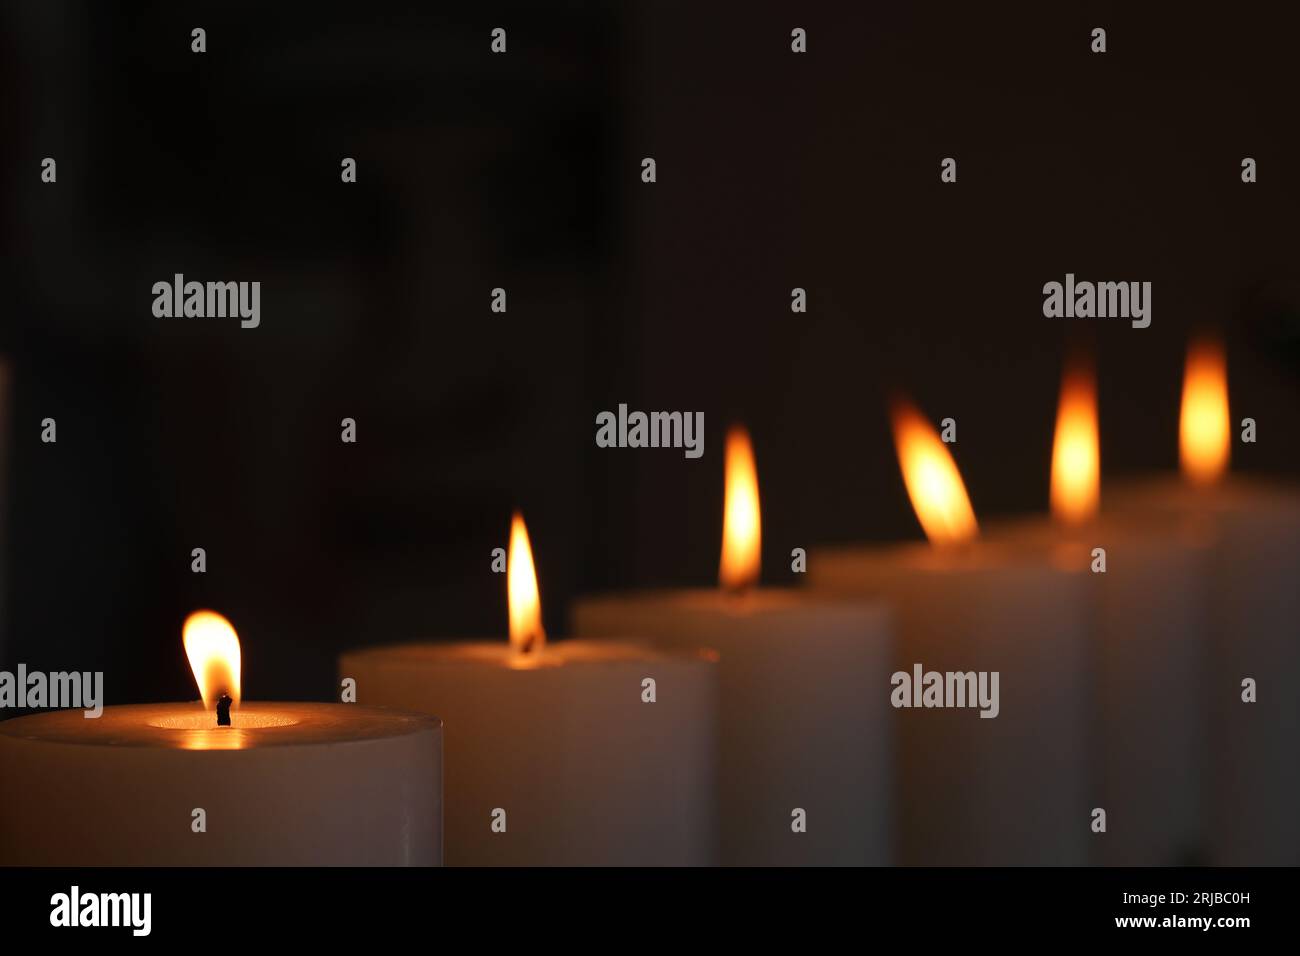 6 candles burning and flickering flame in against darkened background. Candle light vigil for remembering victims of crime or lost relatives. Stock Photo